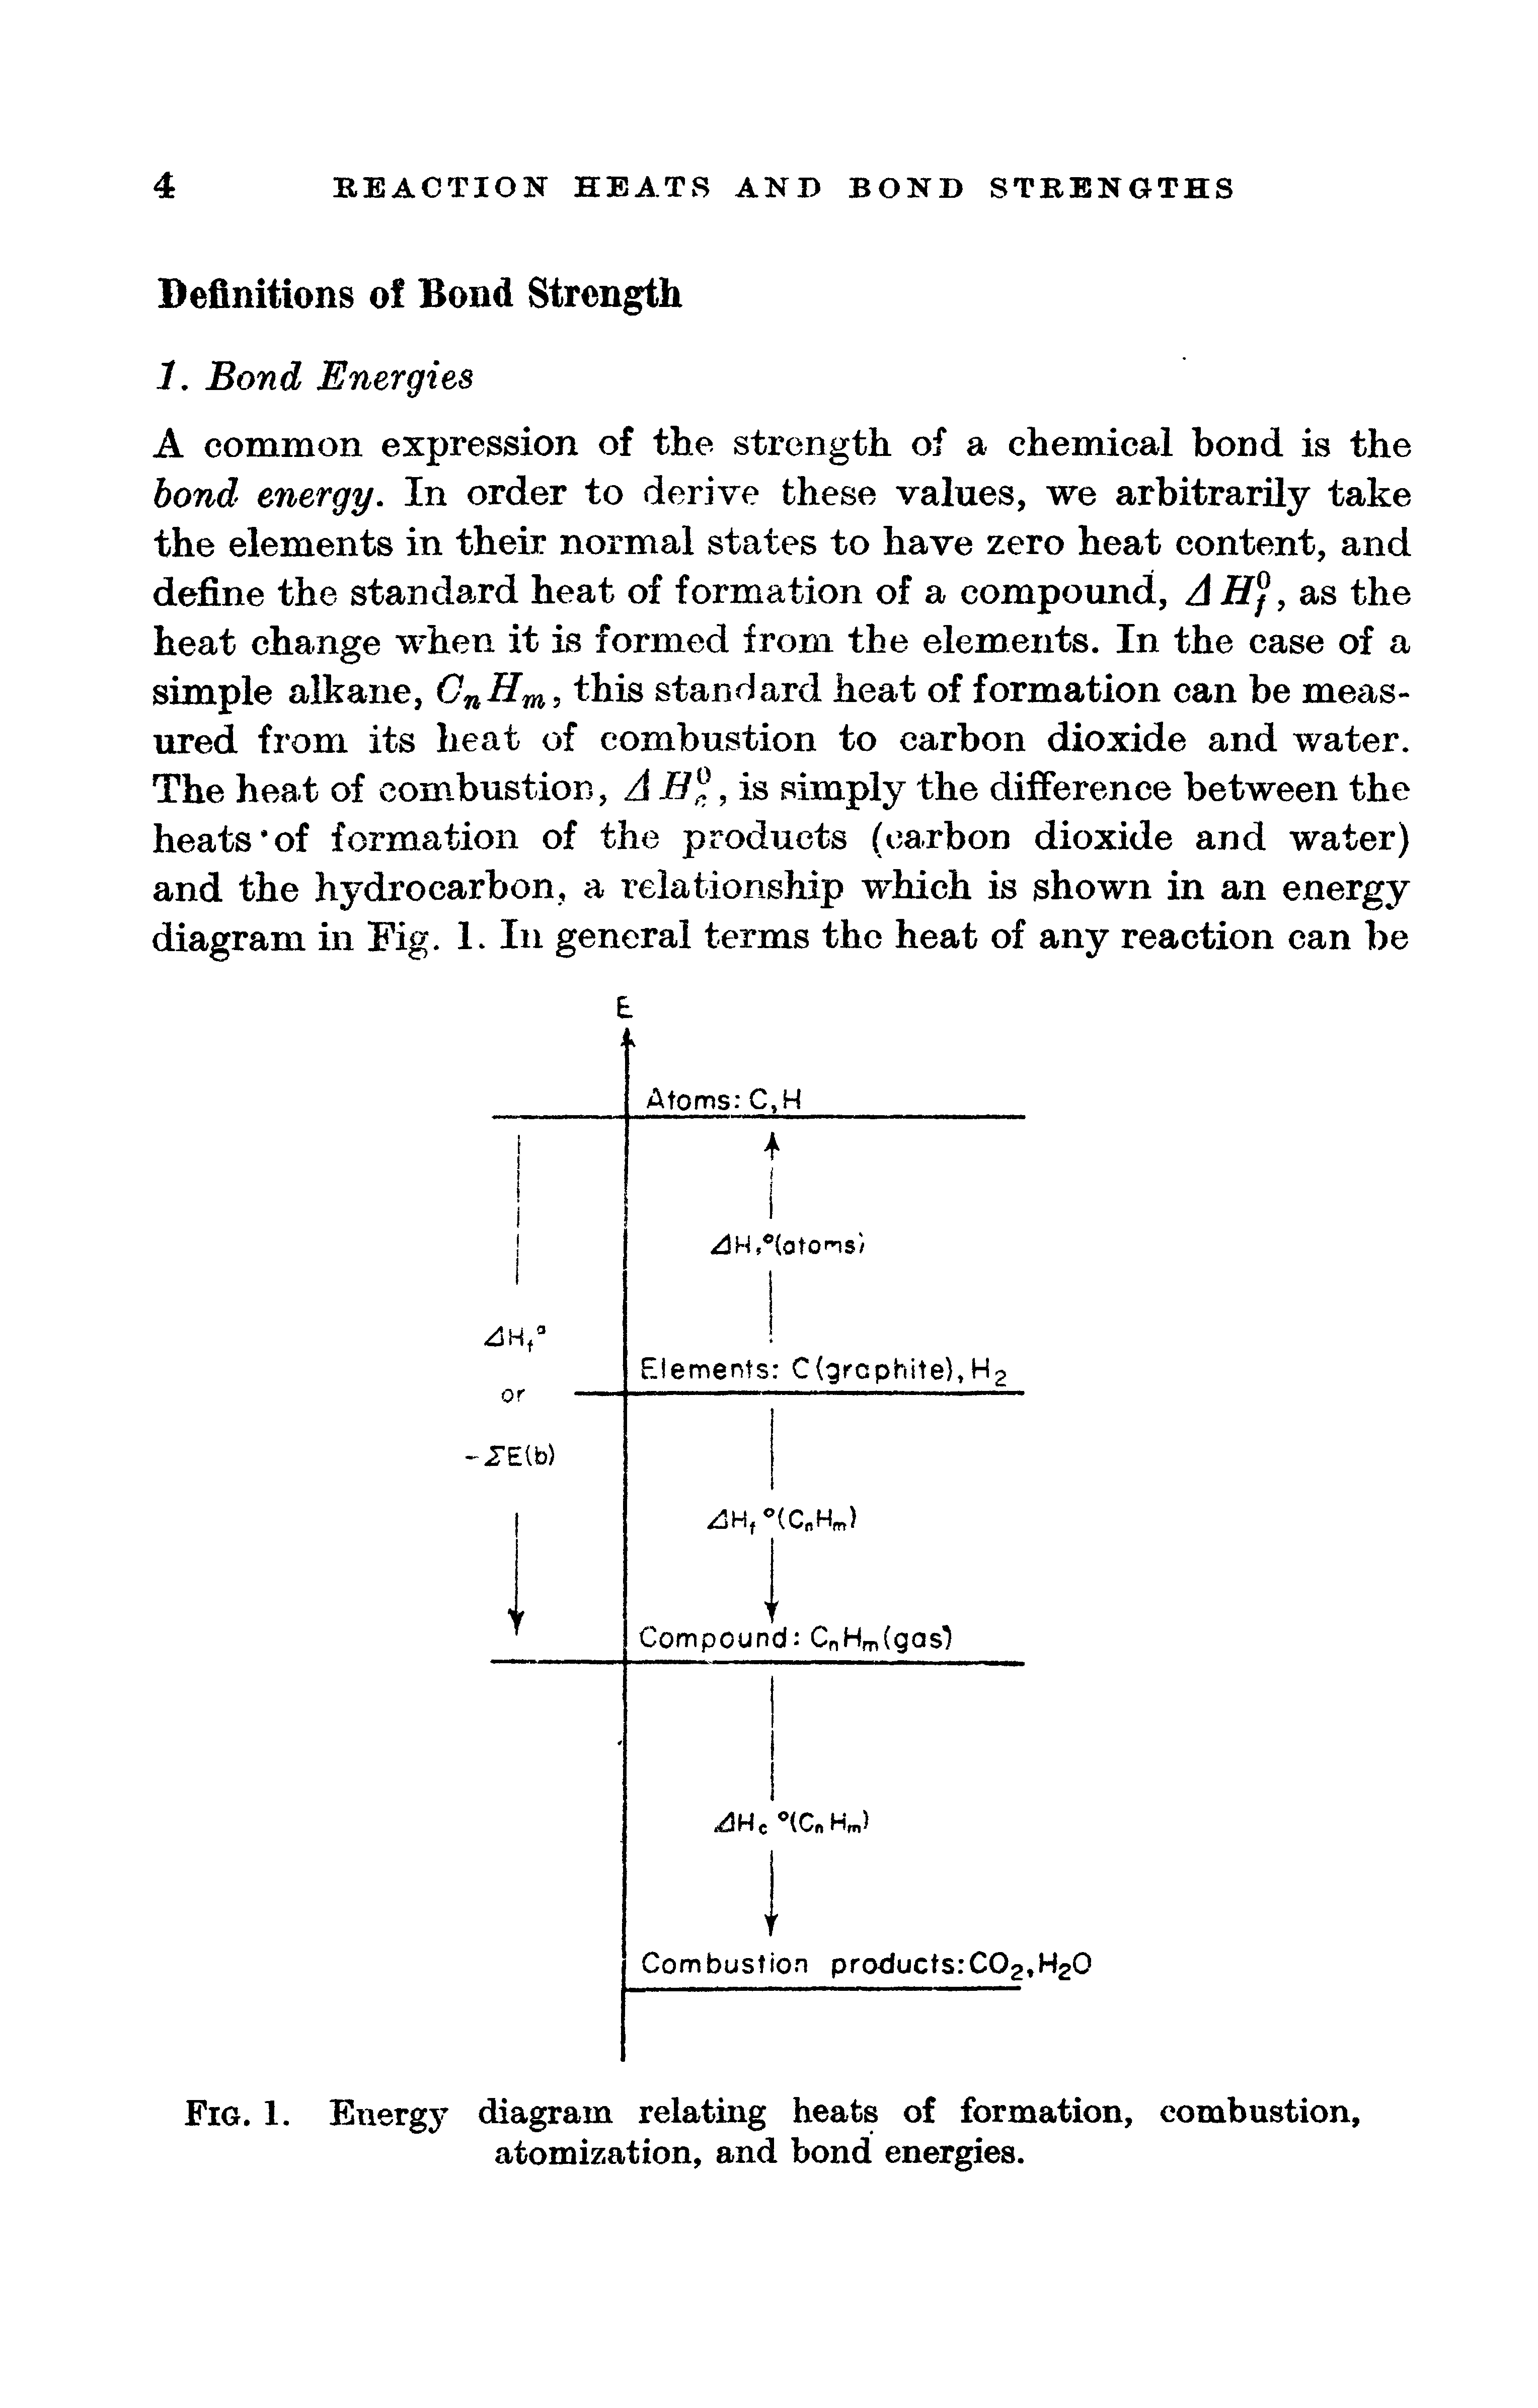 Fig. 1. Energy diagram relating heats of formation, combustion, atomization, and bond energies.